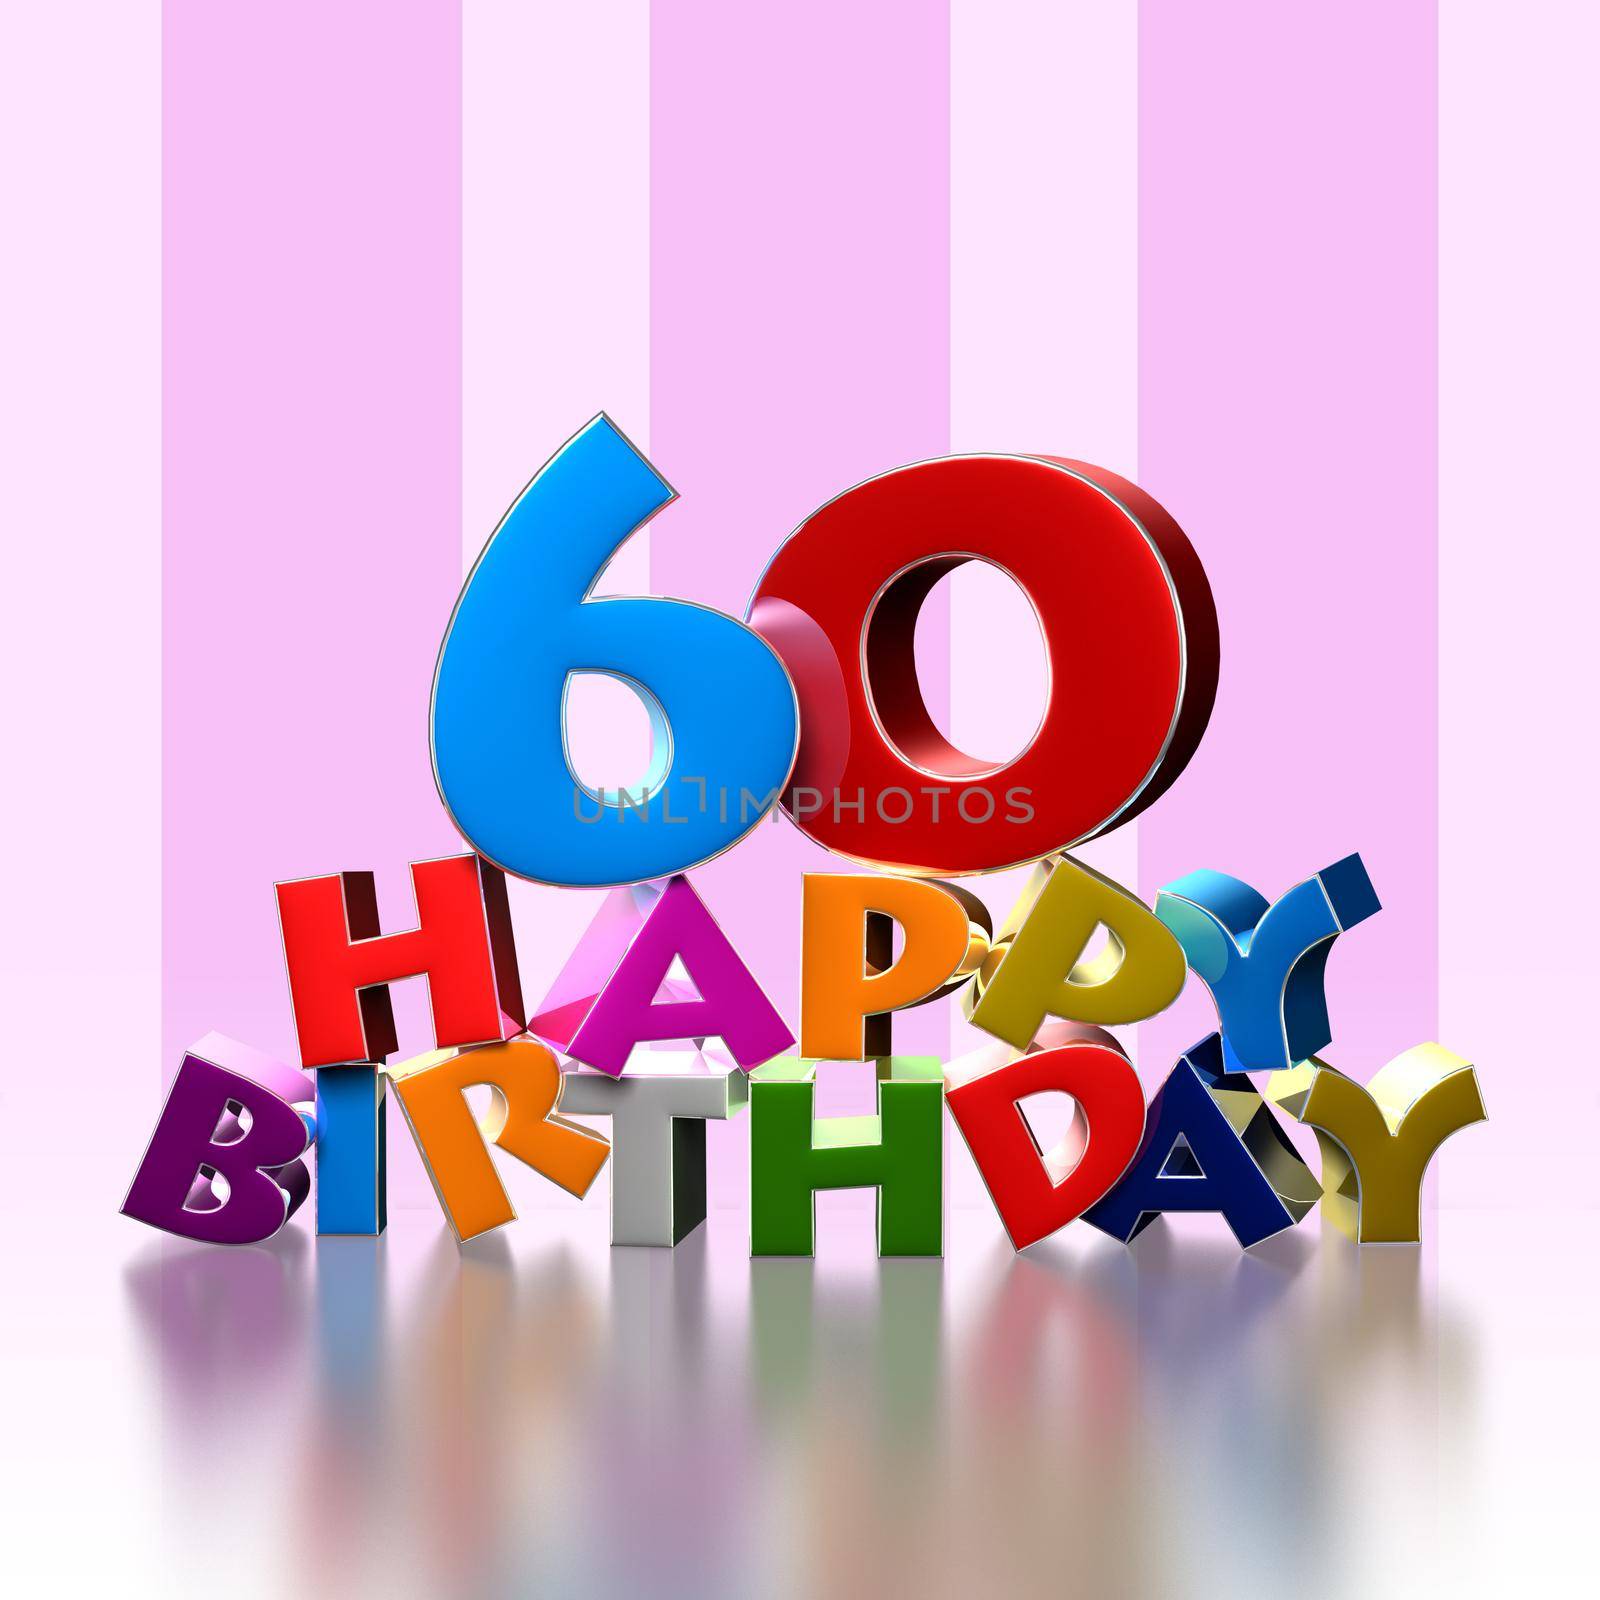 60 happy birthday 3D illustration on pink background.With clipping path. by thitimontoyai